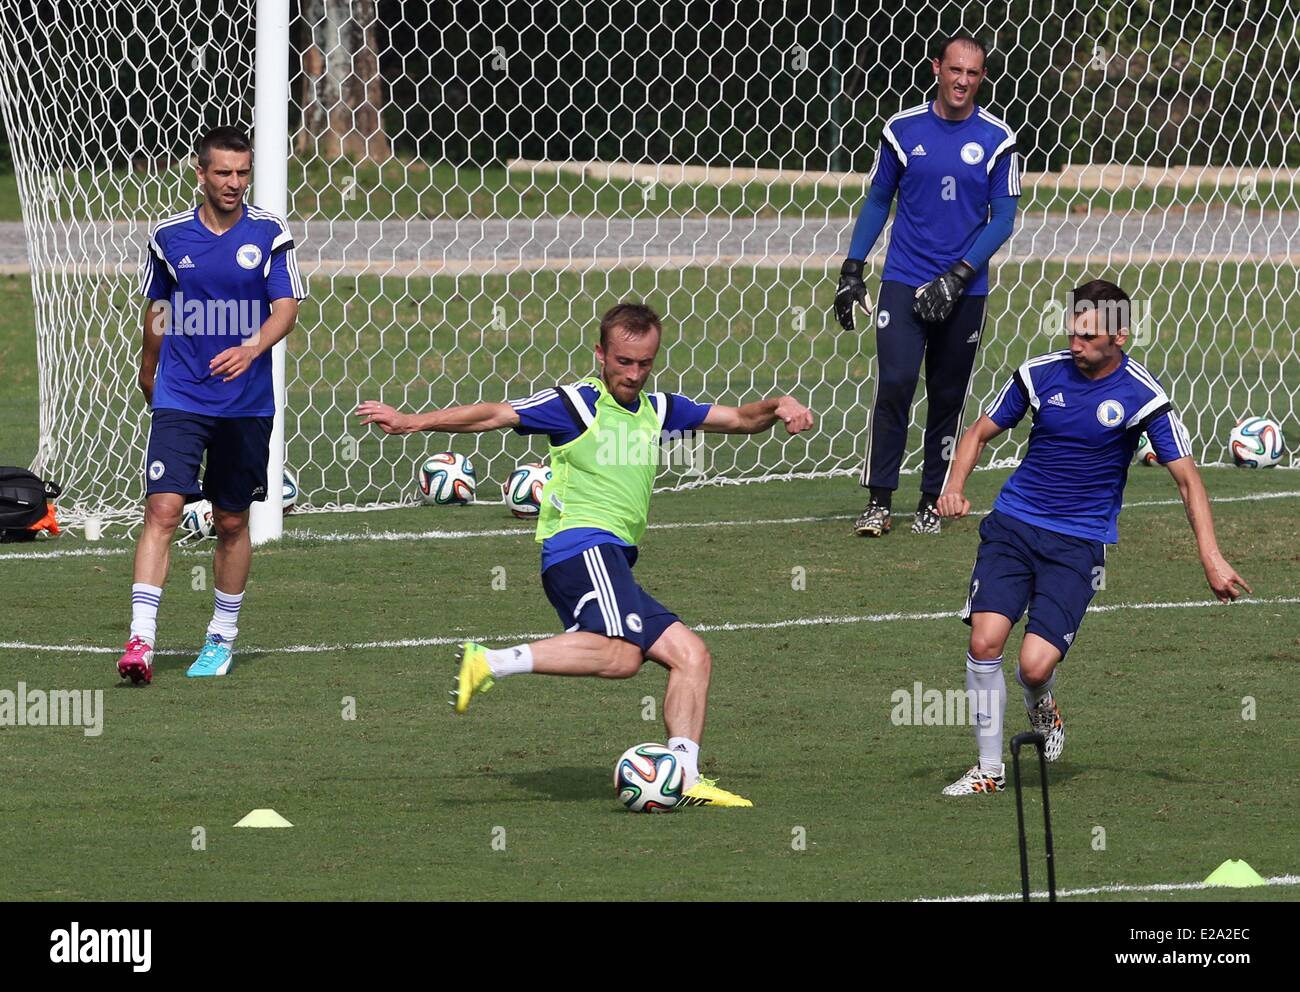 Sao Paulo, Brazil. 17th June, 2014. Player training reserves squad of Bosnia held in Guaruja, south coast of Sao Paulo, southeastern Brazil, on June 17, 2014. Holders players are off today. Credit:  dpa picture alliance/Alamy Live News Stock Photo